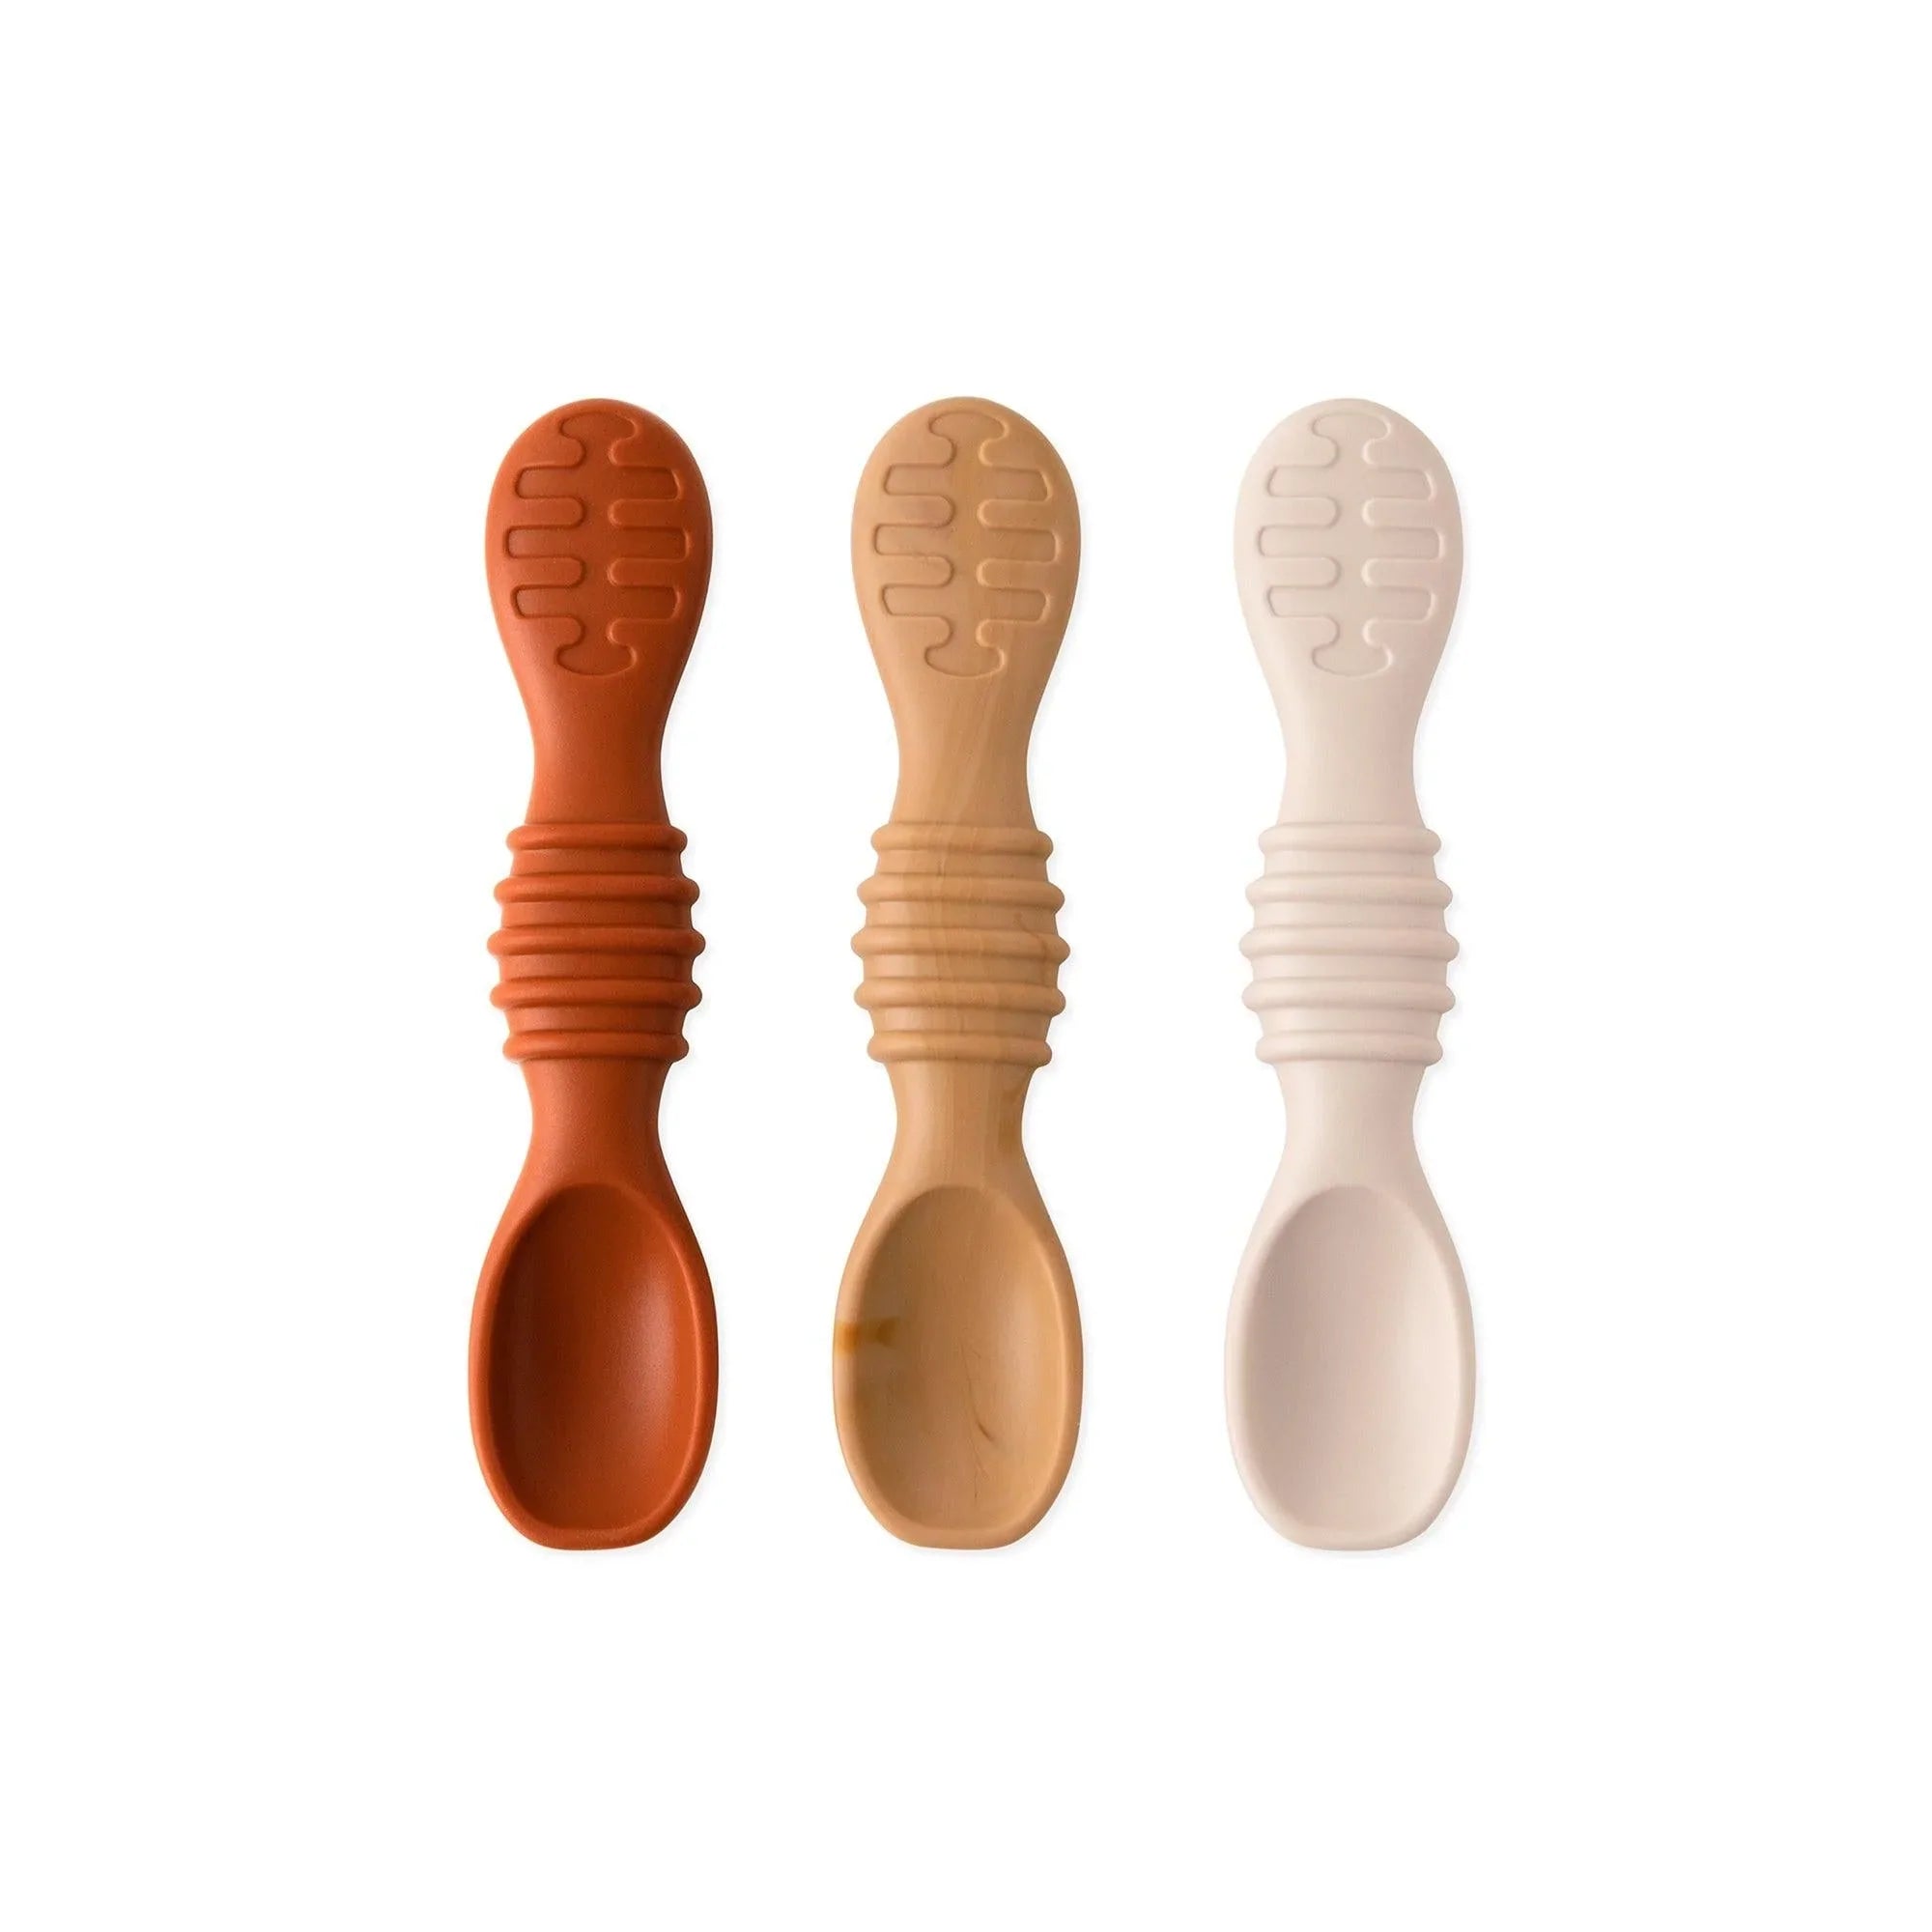 Silicone Dipping Spoons 3 Pack: Rocky Road - Bumkins